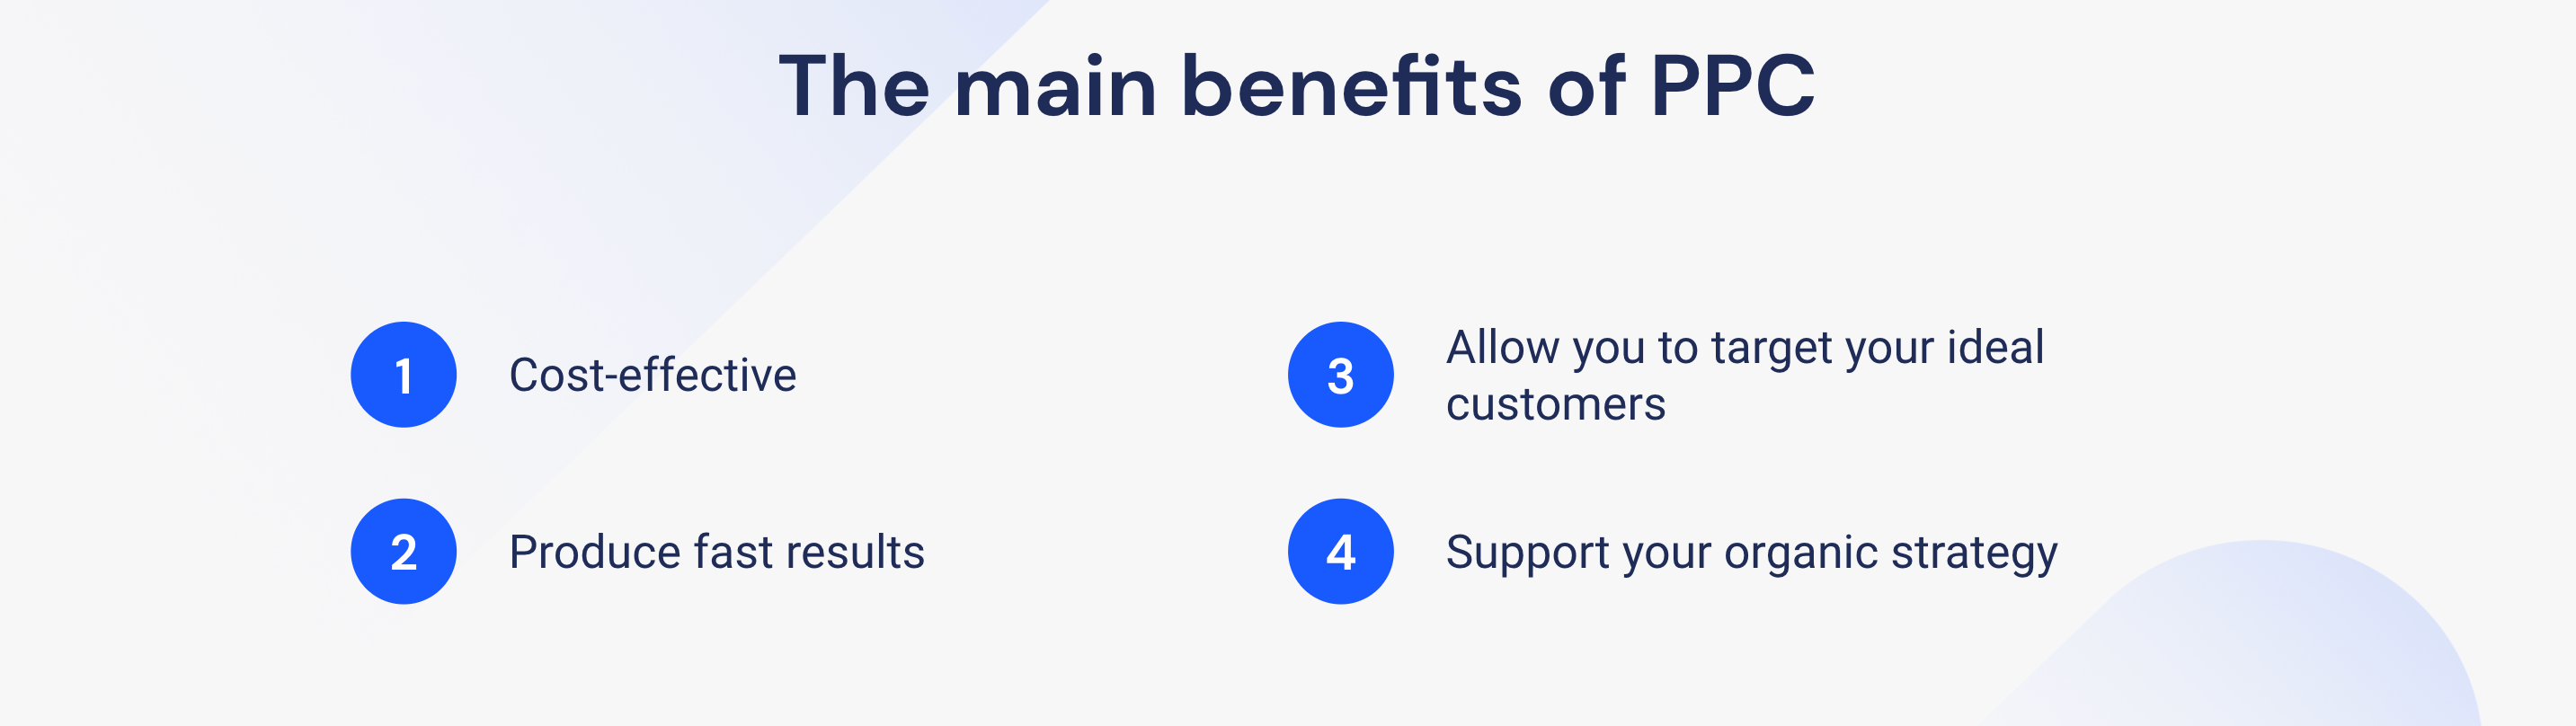 The 4 main benefits of PPC 